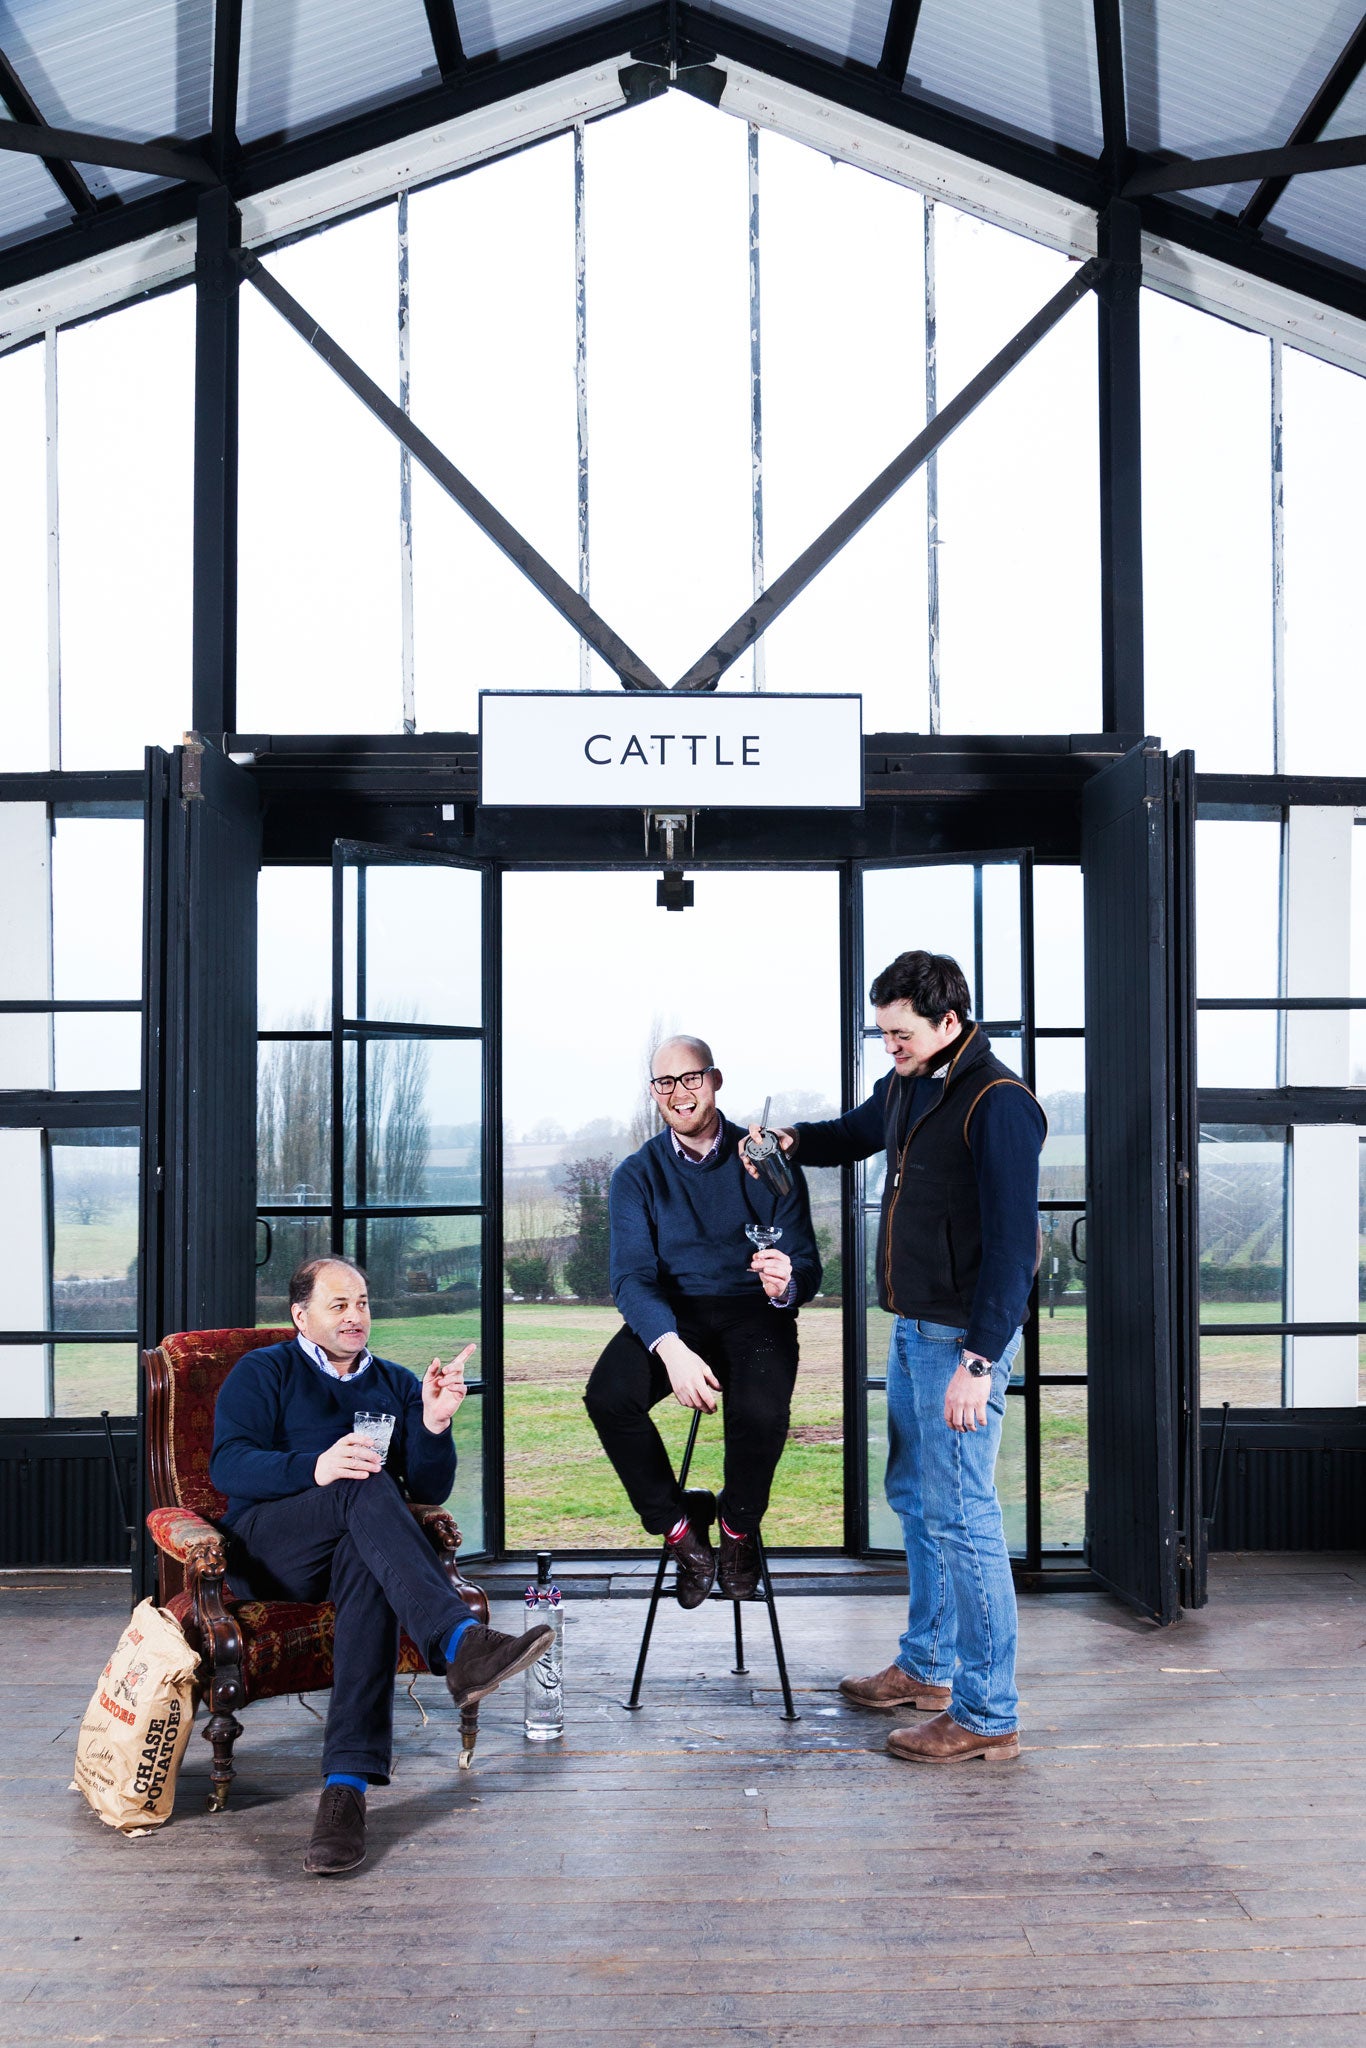 Toasting their success: William, James and Harry Chase at the distillery